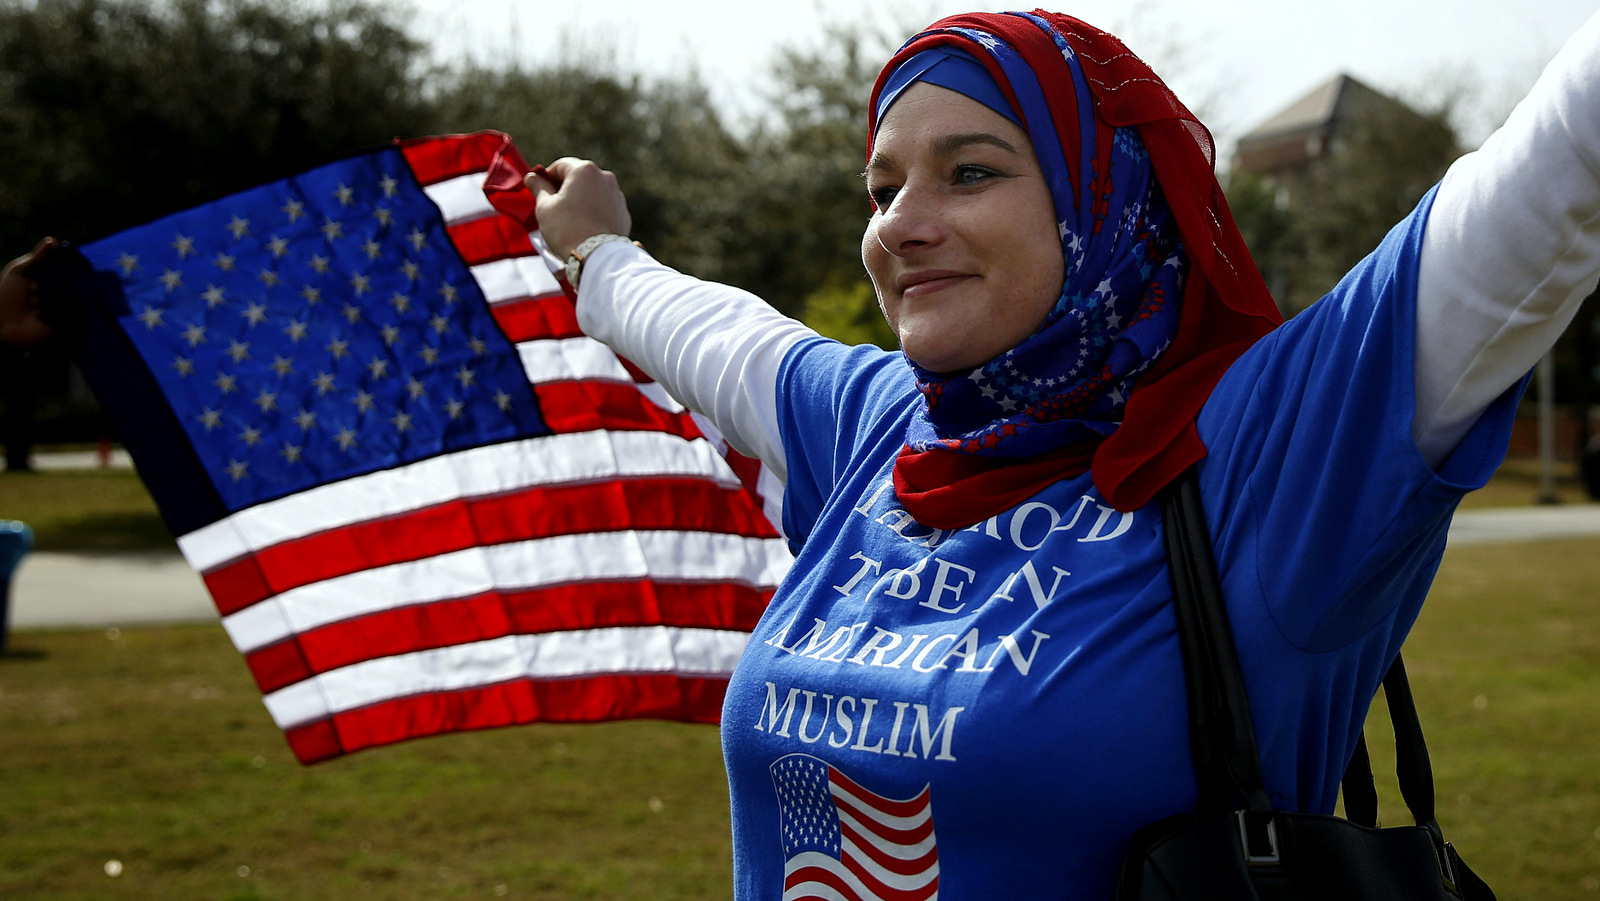 Stacey Miller, holds an America flag, protesting a Donald Trump a campaign rally, Saturday, March 5, 2016, in Orlando, Fla. (AP Photo/Brynn Anderson)